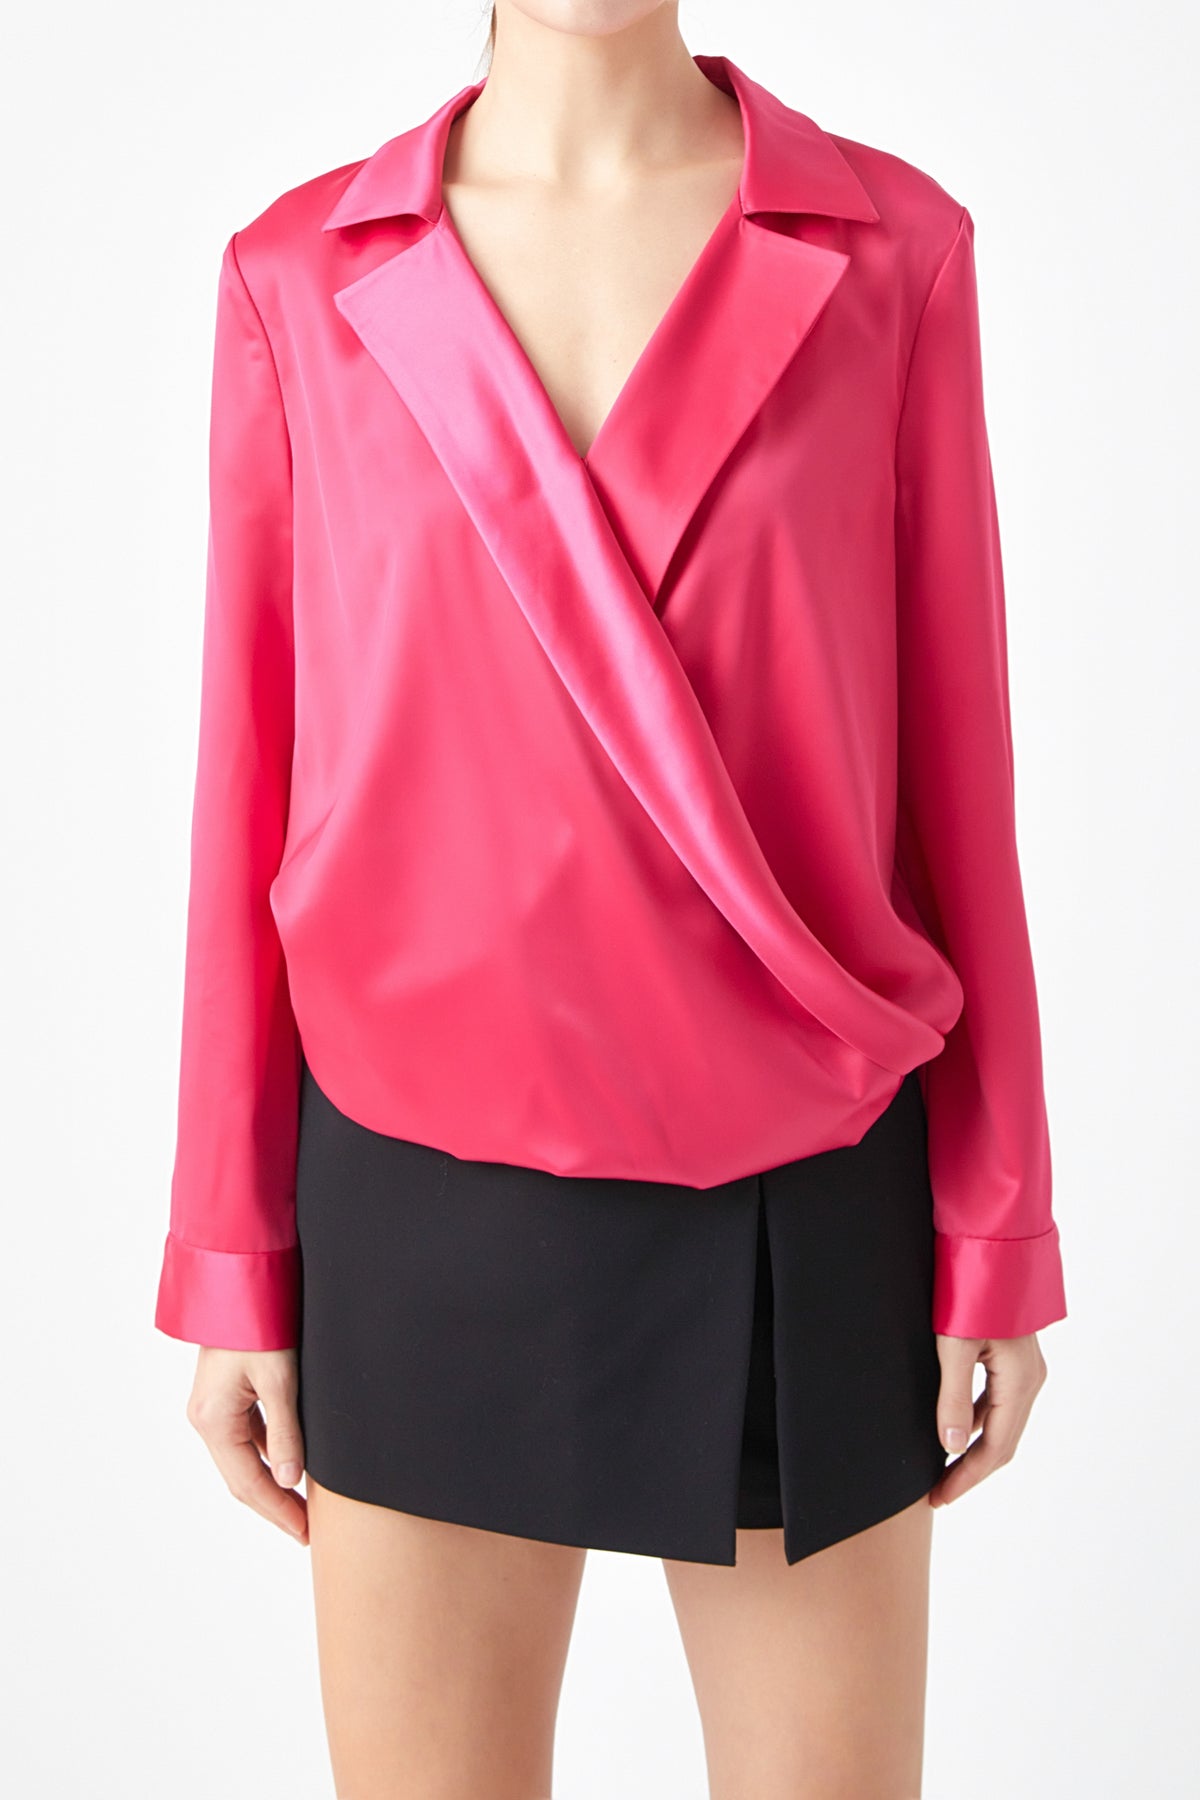 ENDLESS ROSE - Wrapped Satin Blouse - SHIRTS & BLOUSES available at Objectrare